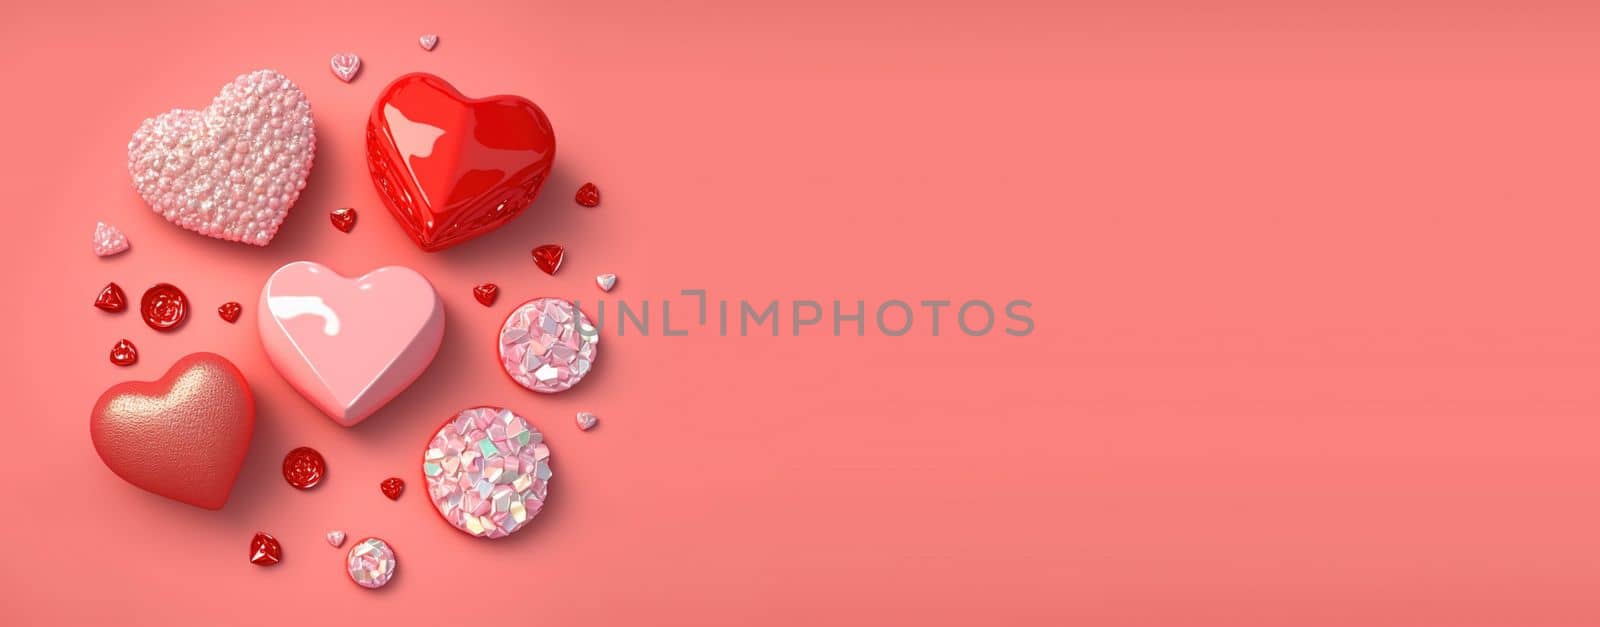 Elegant 3D Heart, Diamond, and Crystal Design for Valentine's Day Greetings by templator